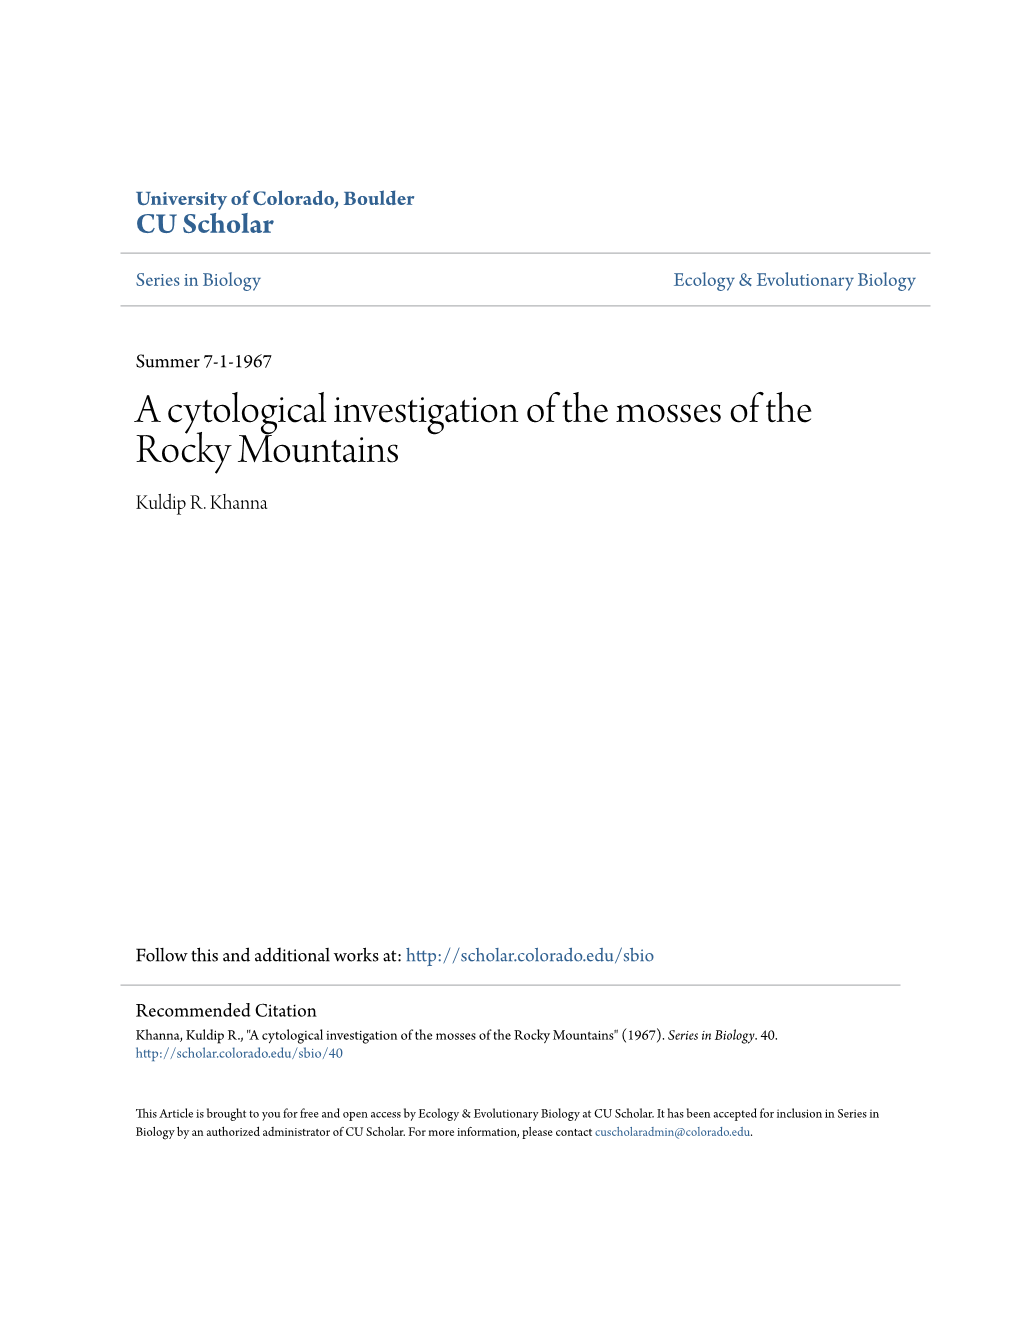 A Cytological Investigation of the Mosses of the Rocky Mountains Kuldip R